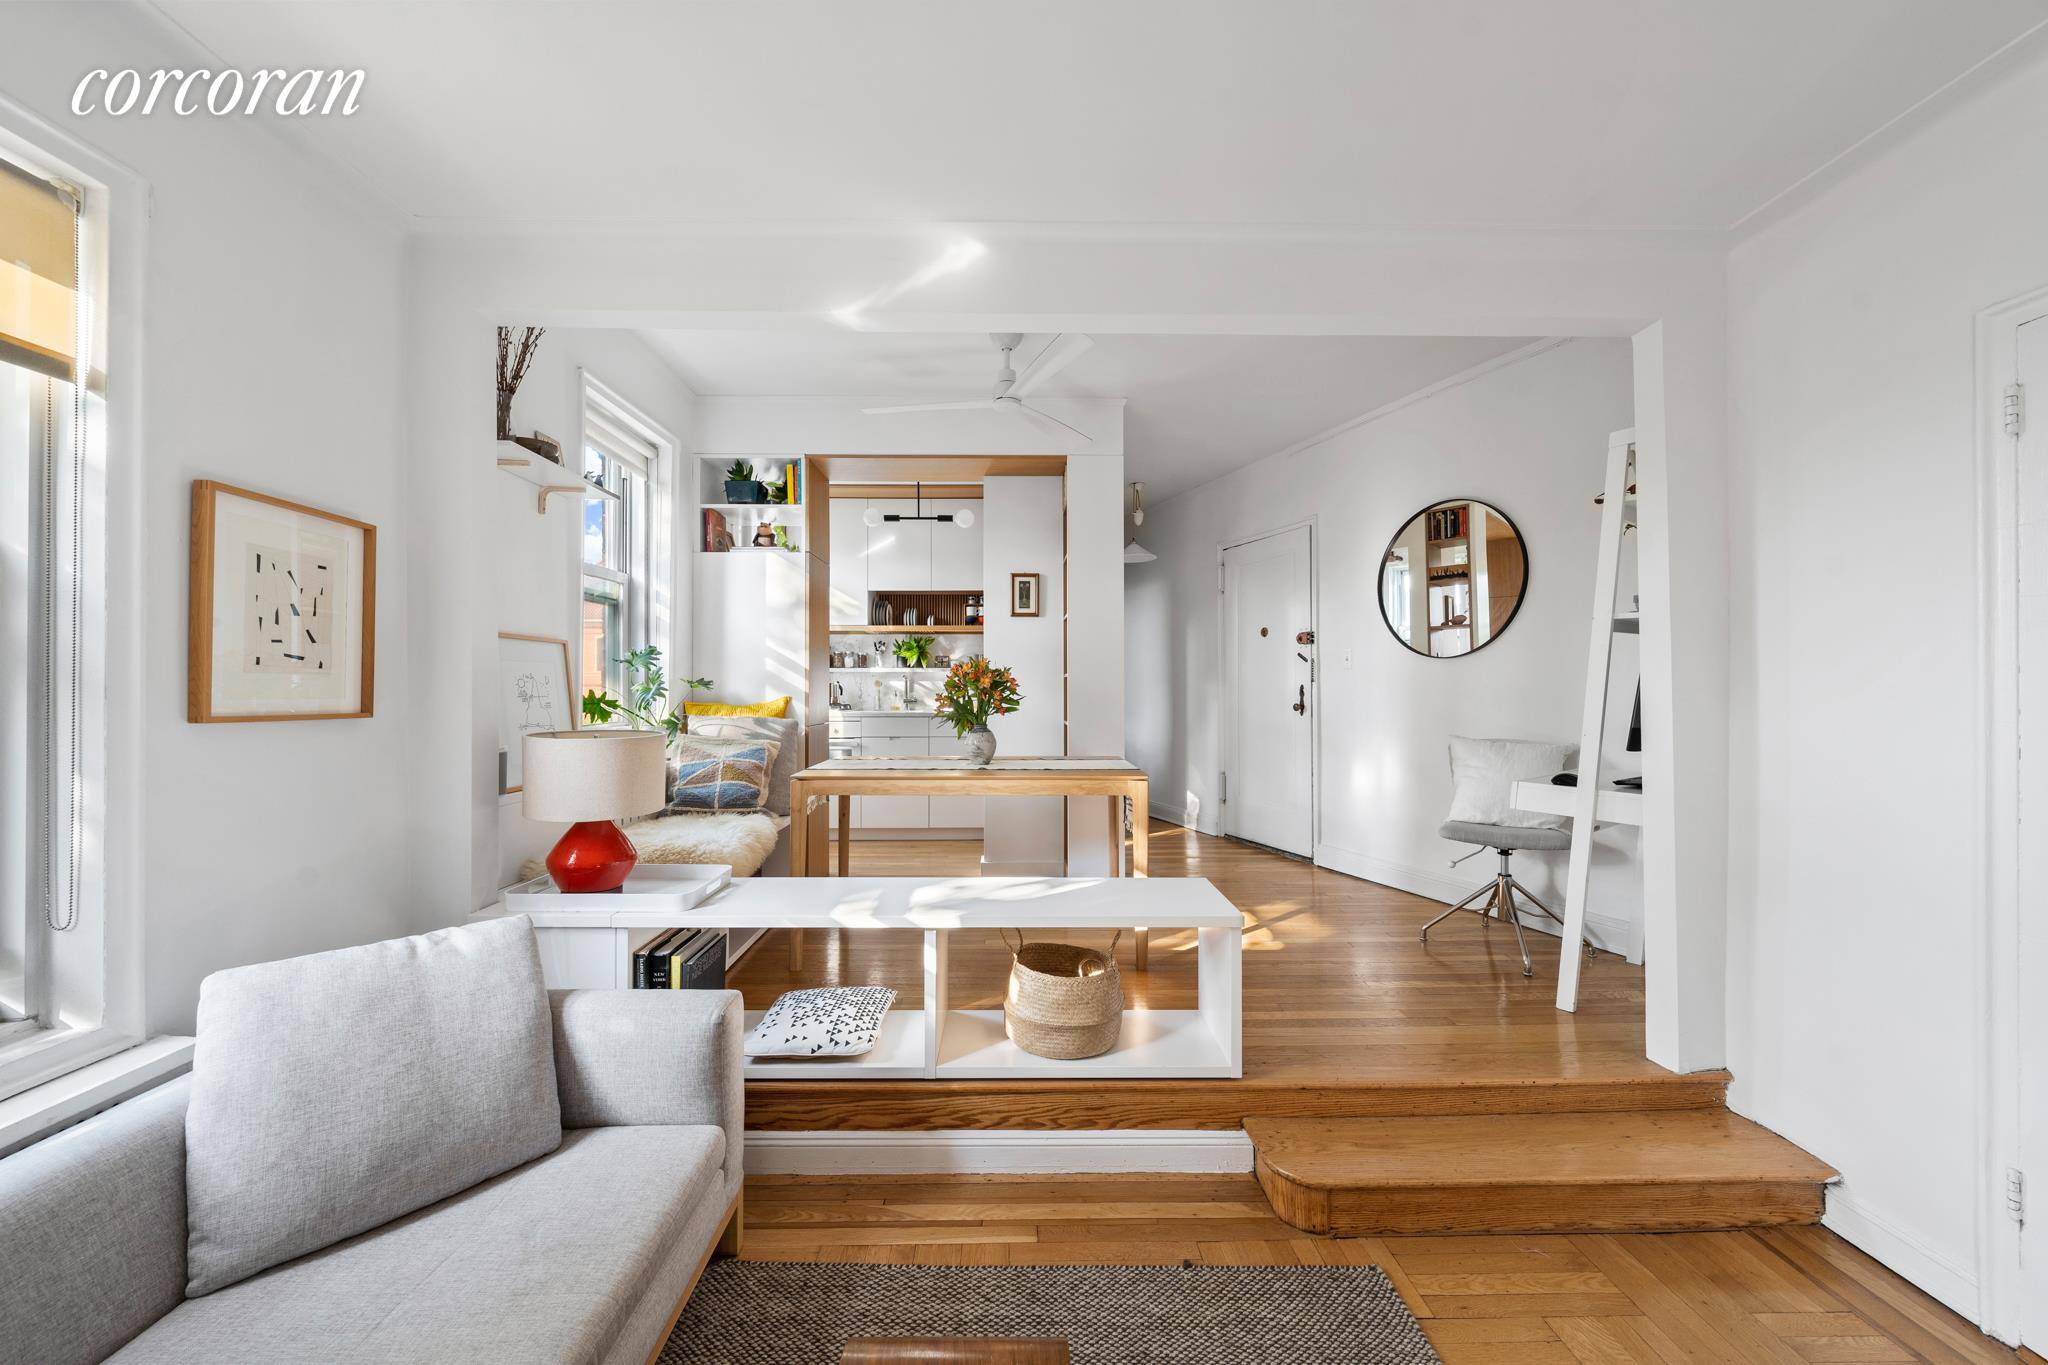 Tranquility awaits in this stunningly renovated one bedroom coop.